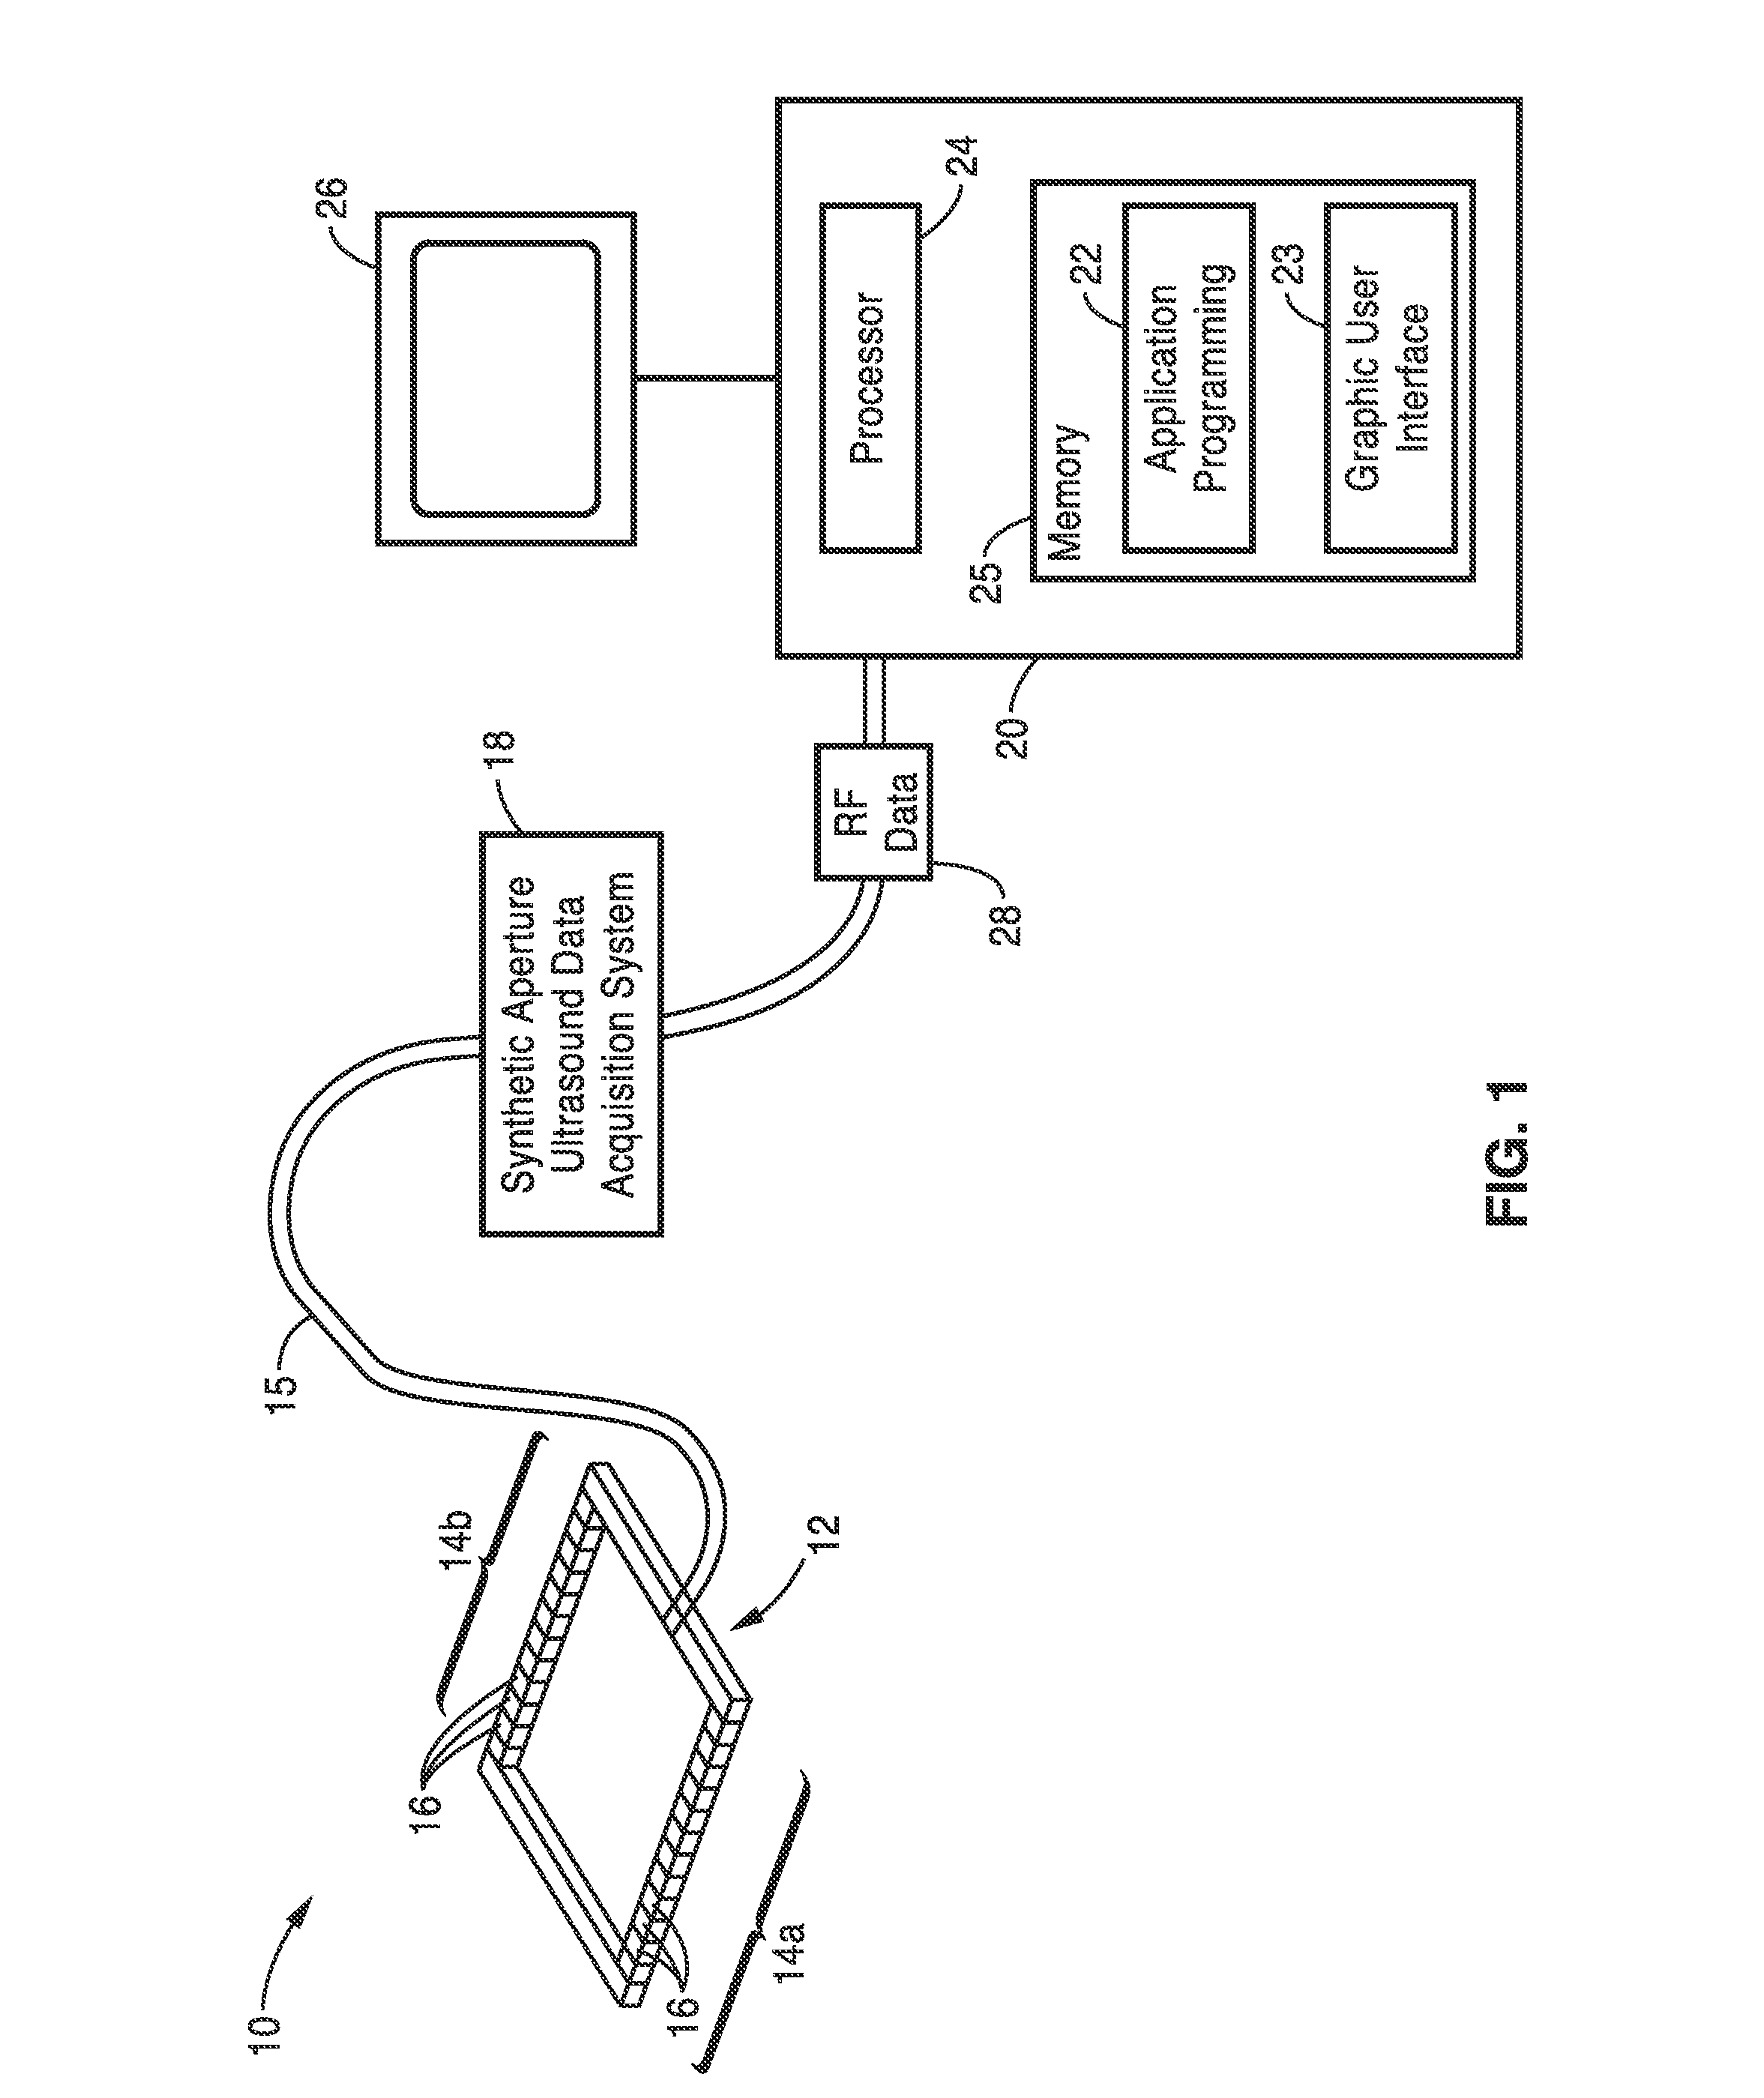 Systems and methods for increasing efficiency of ultrasound waveform tomography